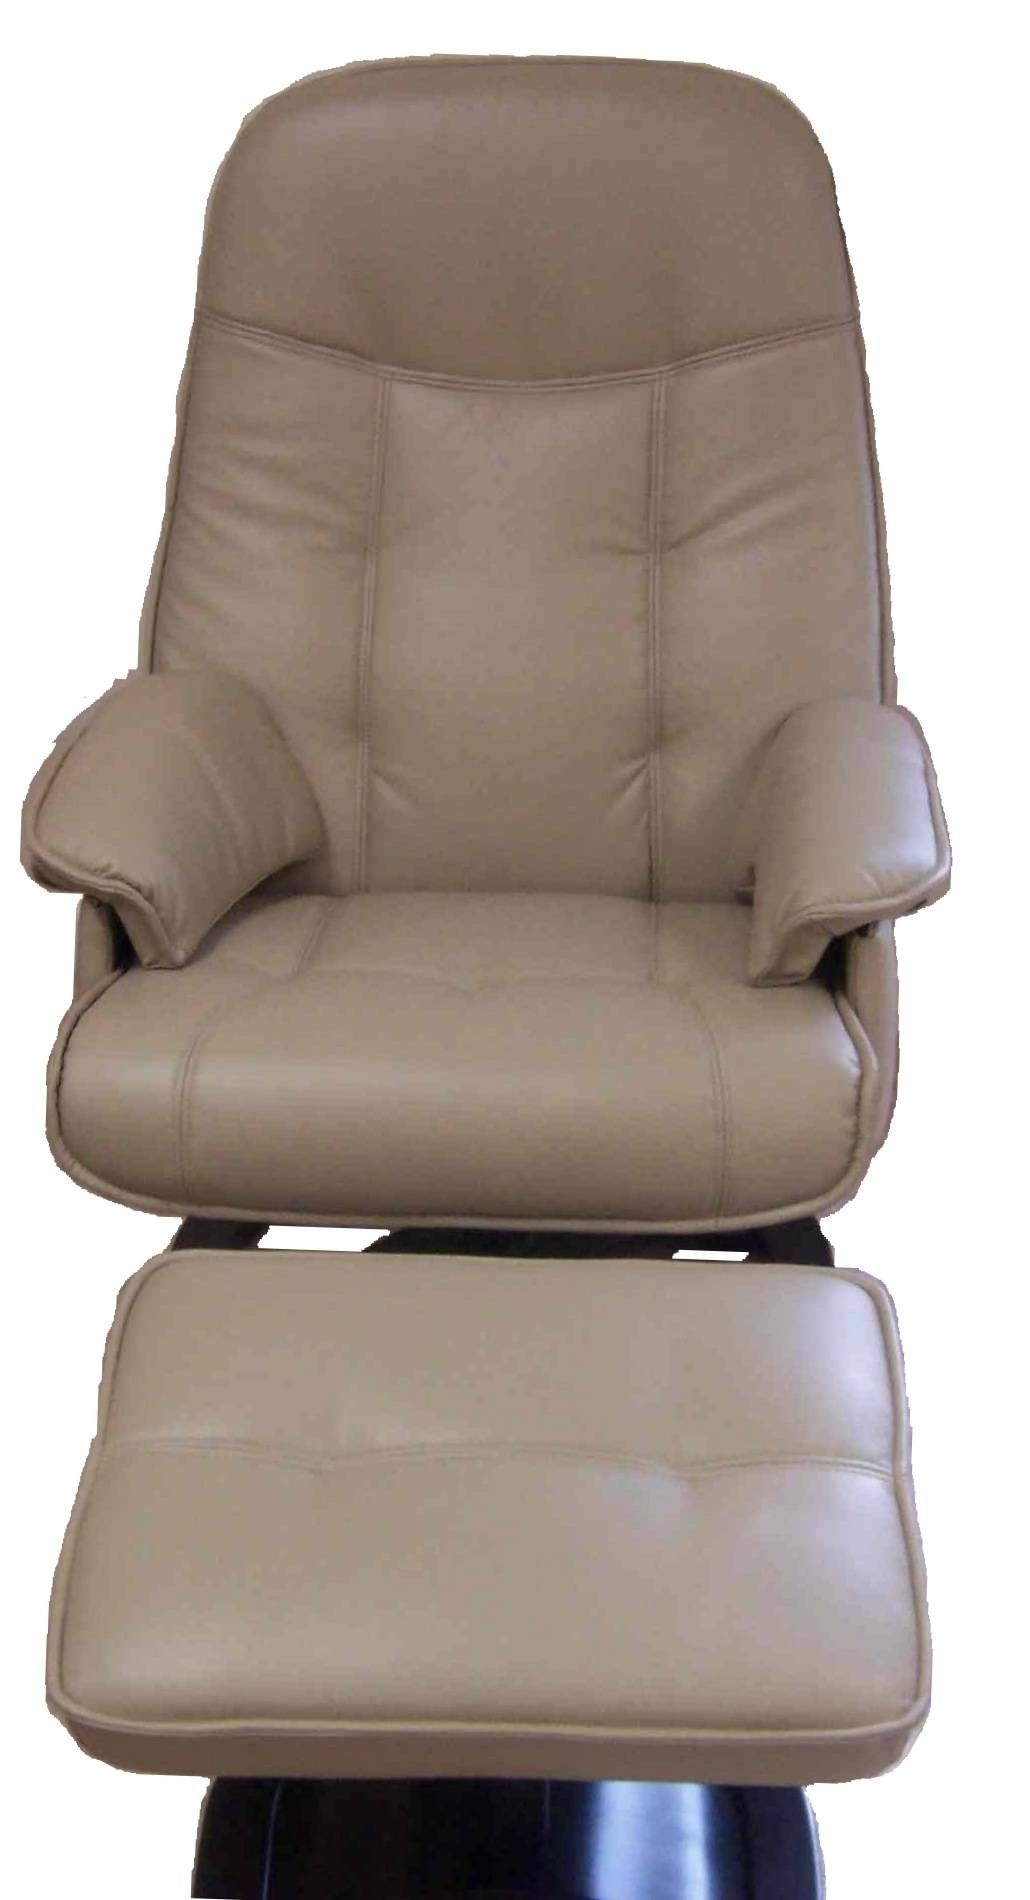 Rv Recliner Sofa 84 With Rv Recliner Sofa | Chinaklsk Within Rv Recliner Sofas (Photo 13 of 15)